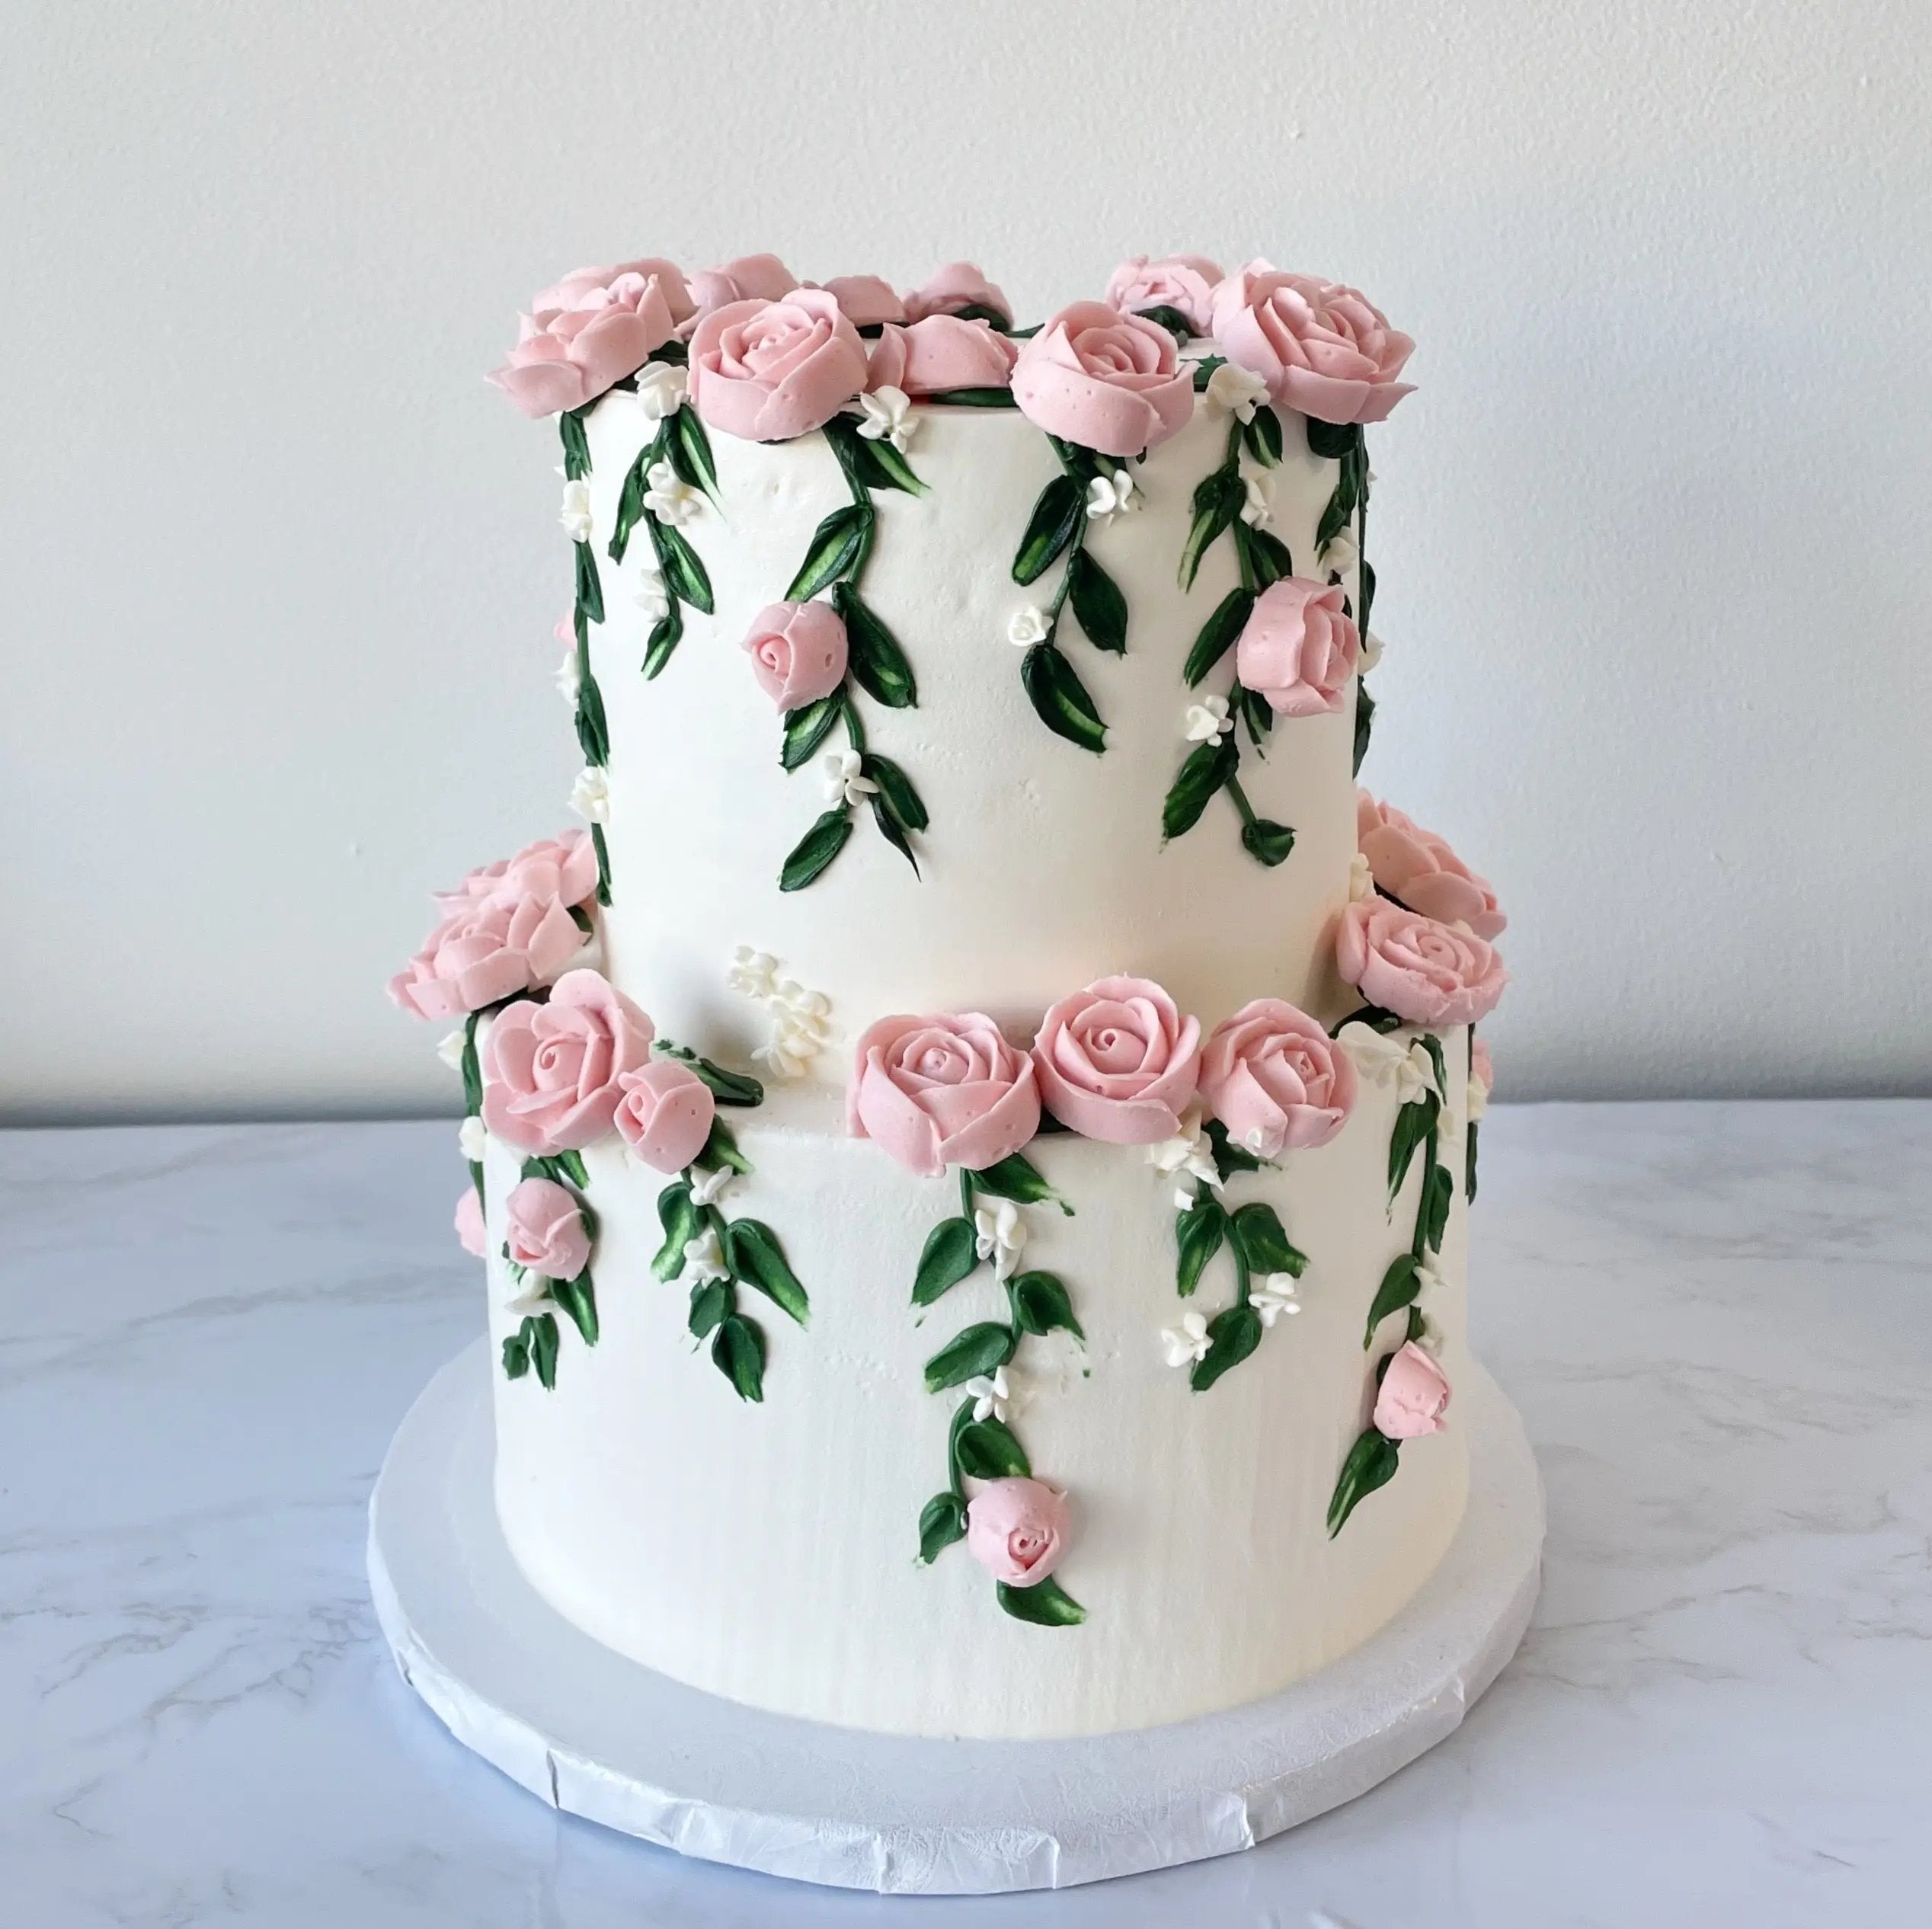 79 wedding cakes that are really pretty! | Pretty wedding cakes, Wedding  cake decorations, Painted wedding cake